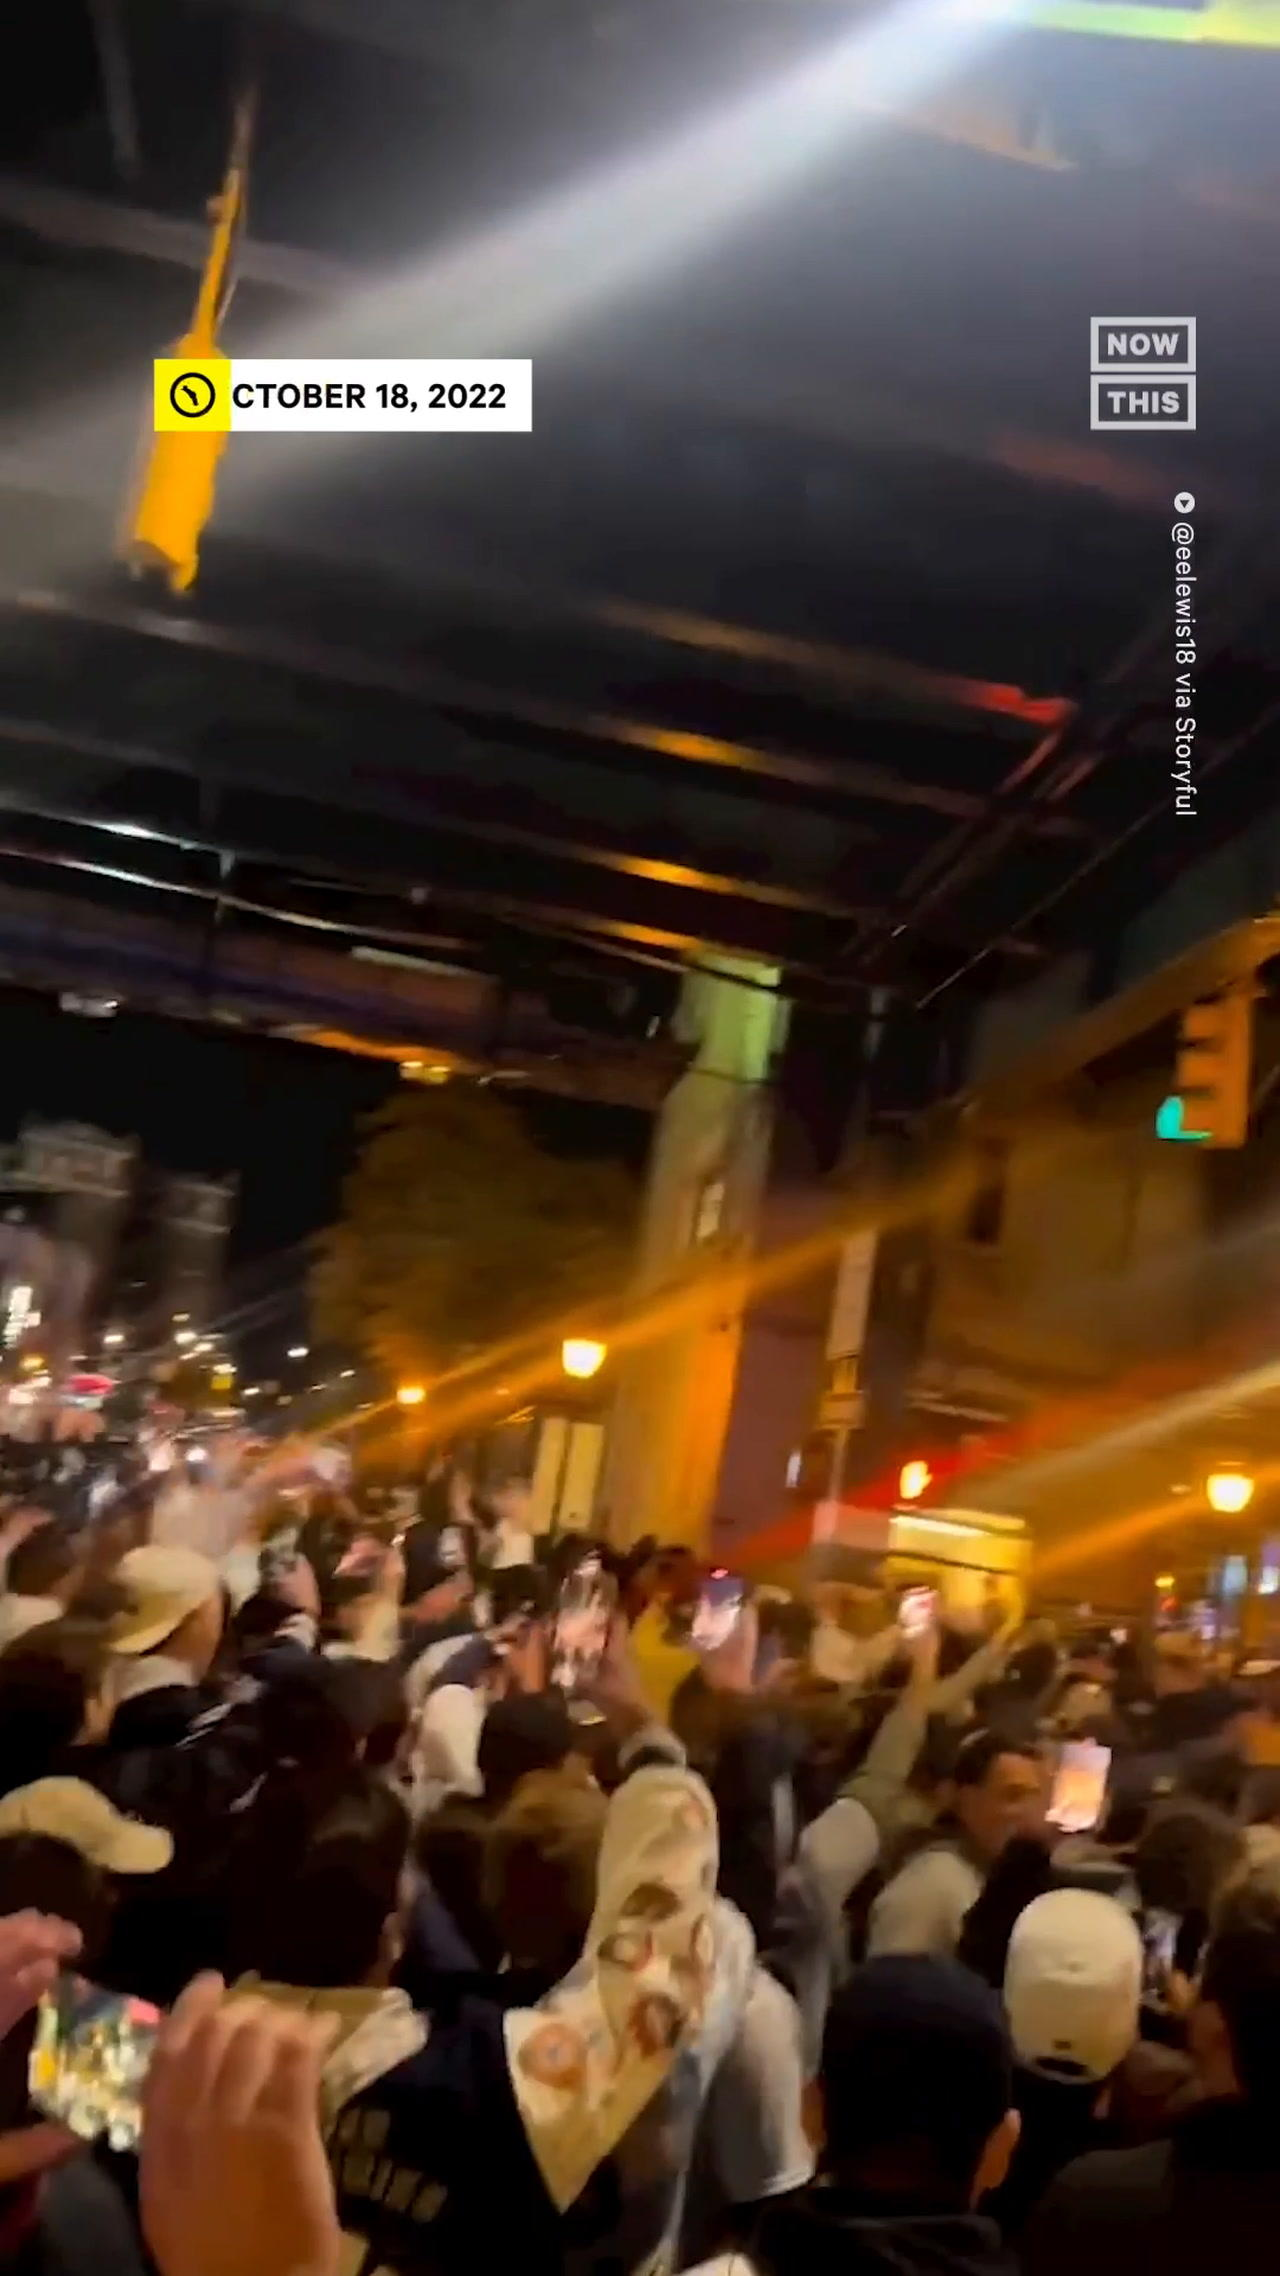 Yankees Fans Celebrate After the Team Advances to the ALCS